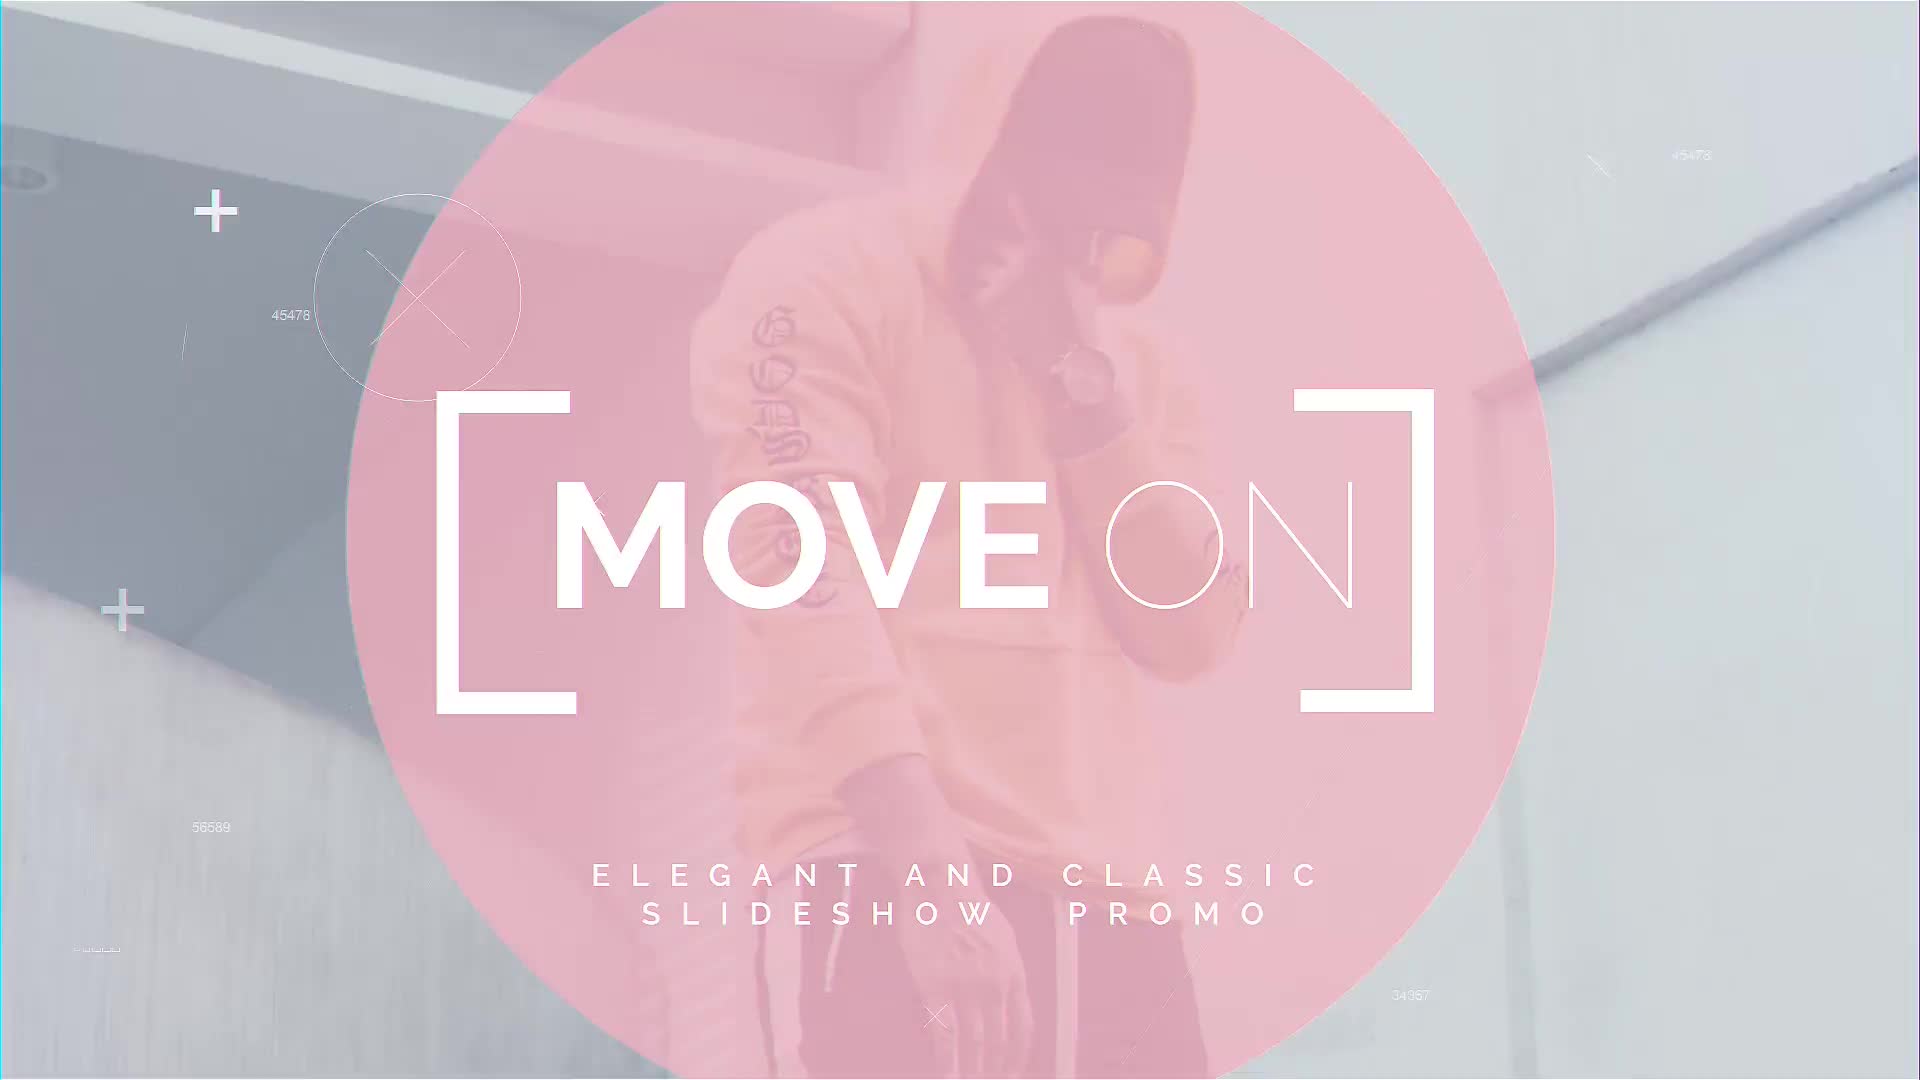 Move On - Download Videohive 22463754